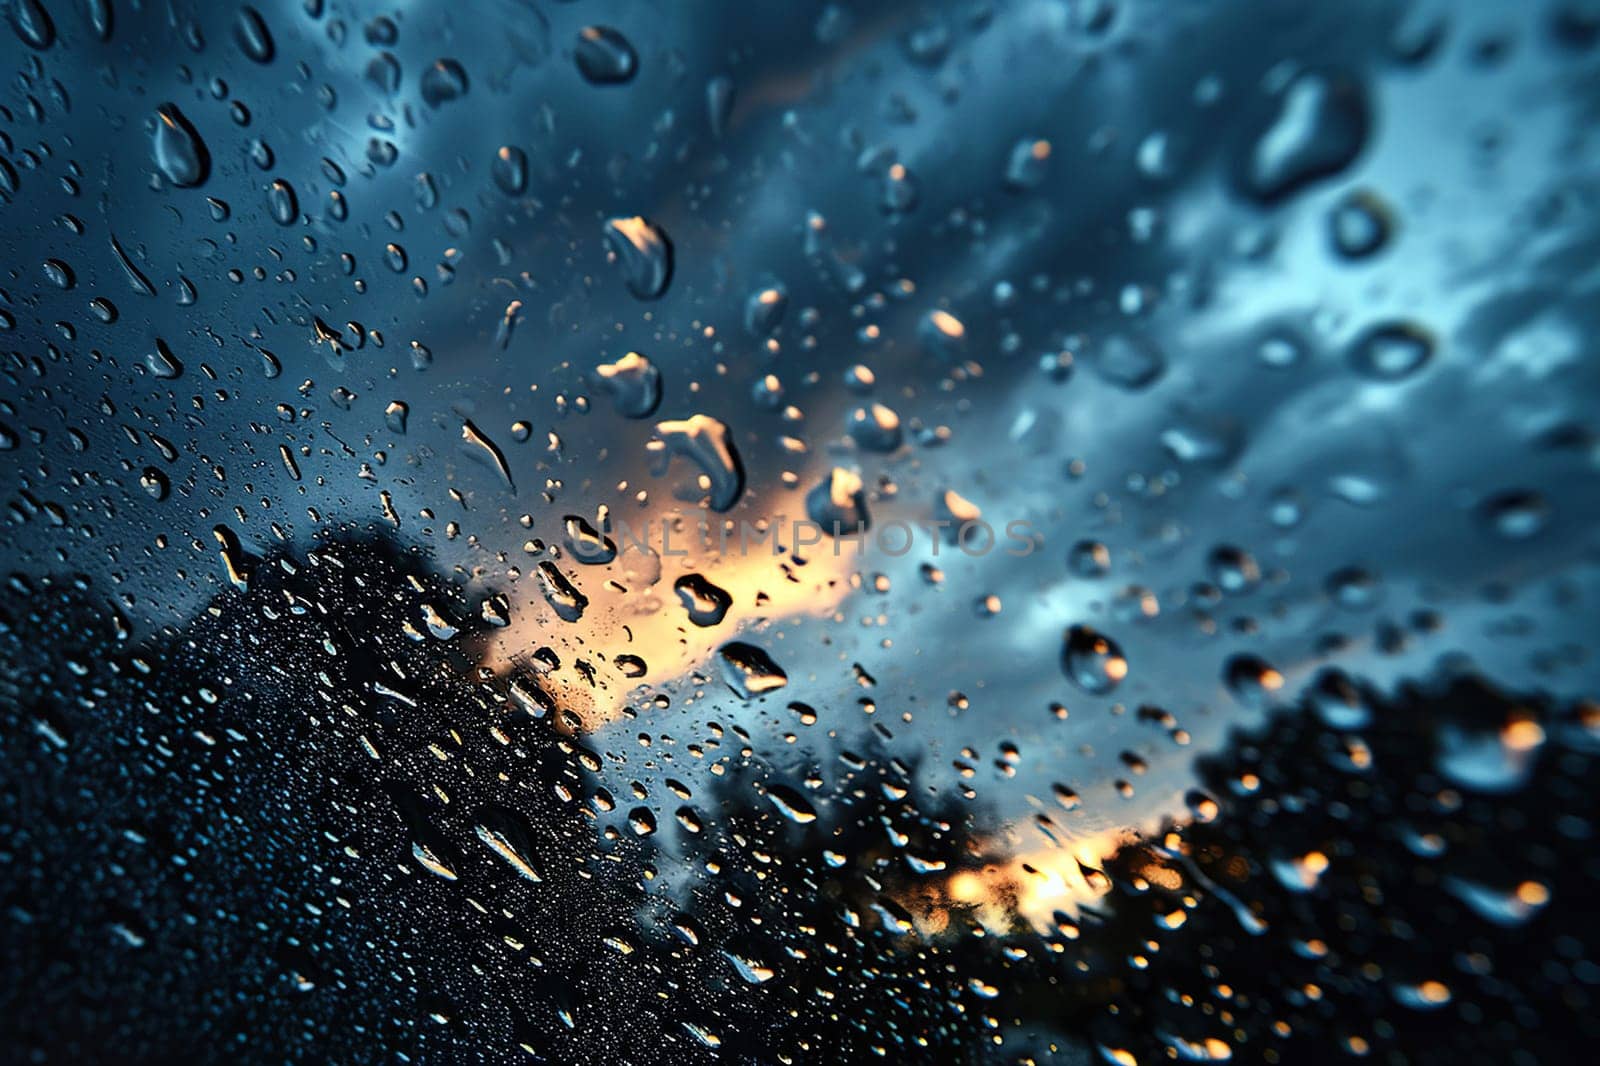 Large drops of rain on the glass or hood of a car with the sky reflected.